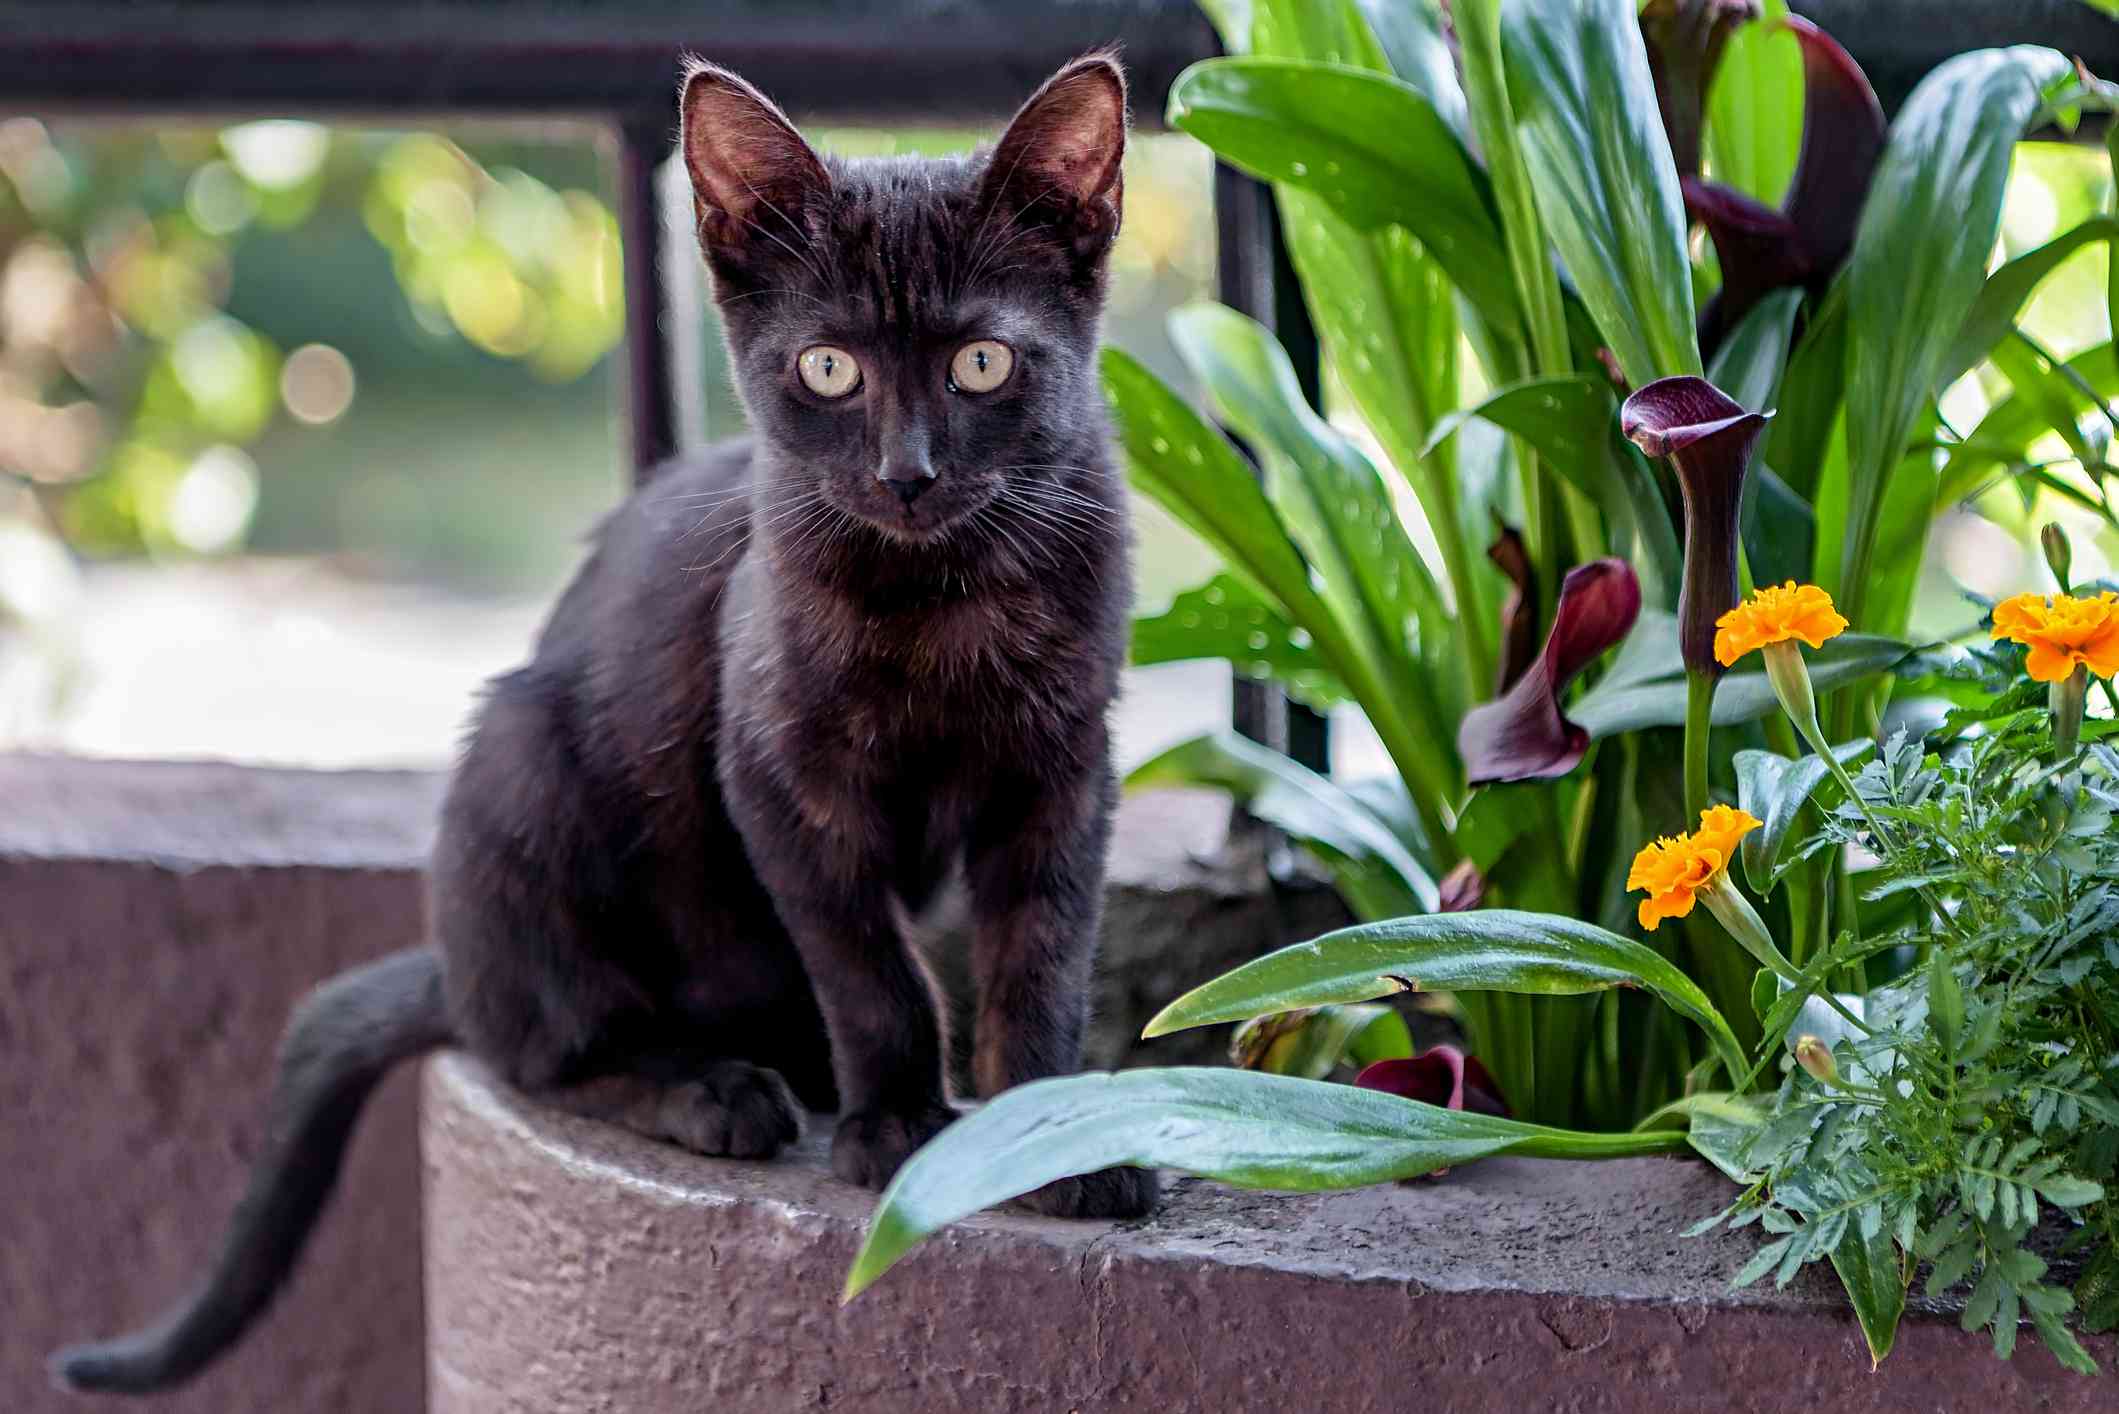 A small black cat with large eyes staring at the camera while sitting on a planter.